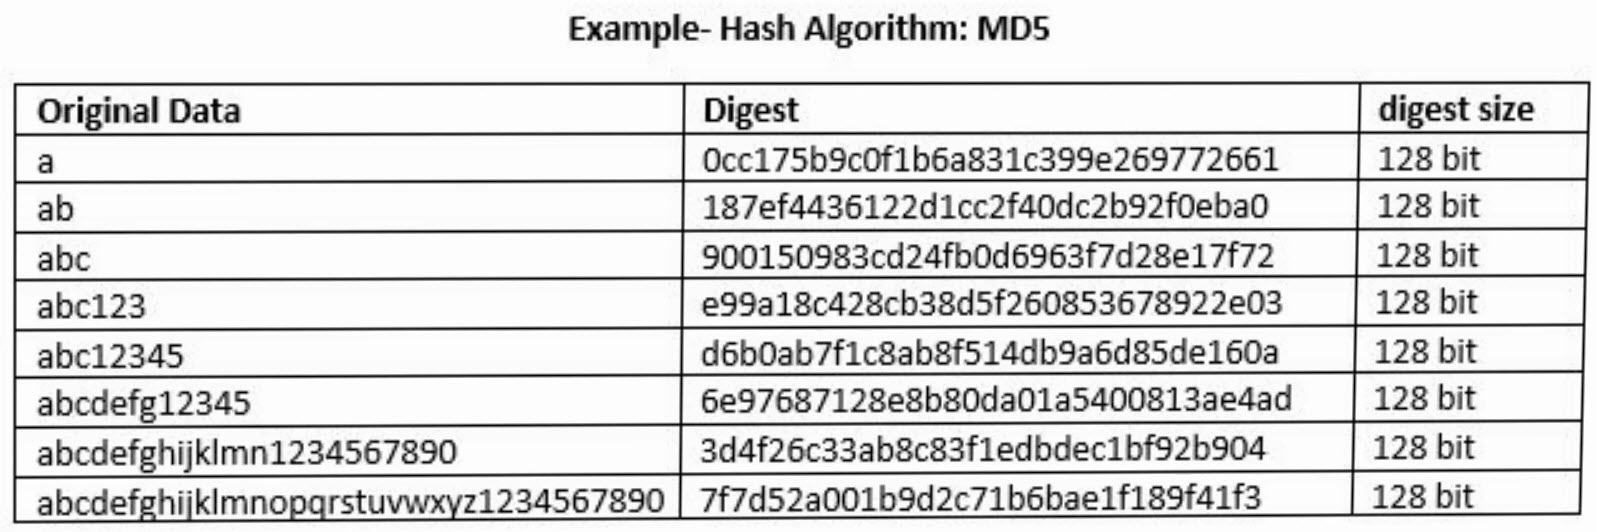 Hash Algorithms, Why hash algorithm is best? - Fixed size - Short or long data will produce the fixed-size digest